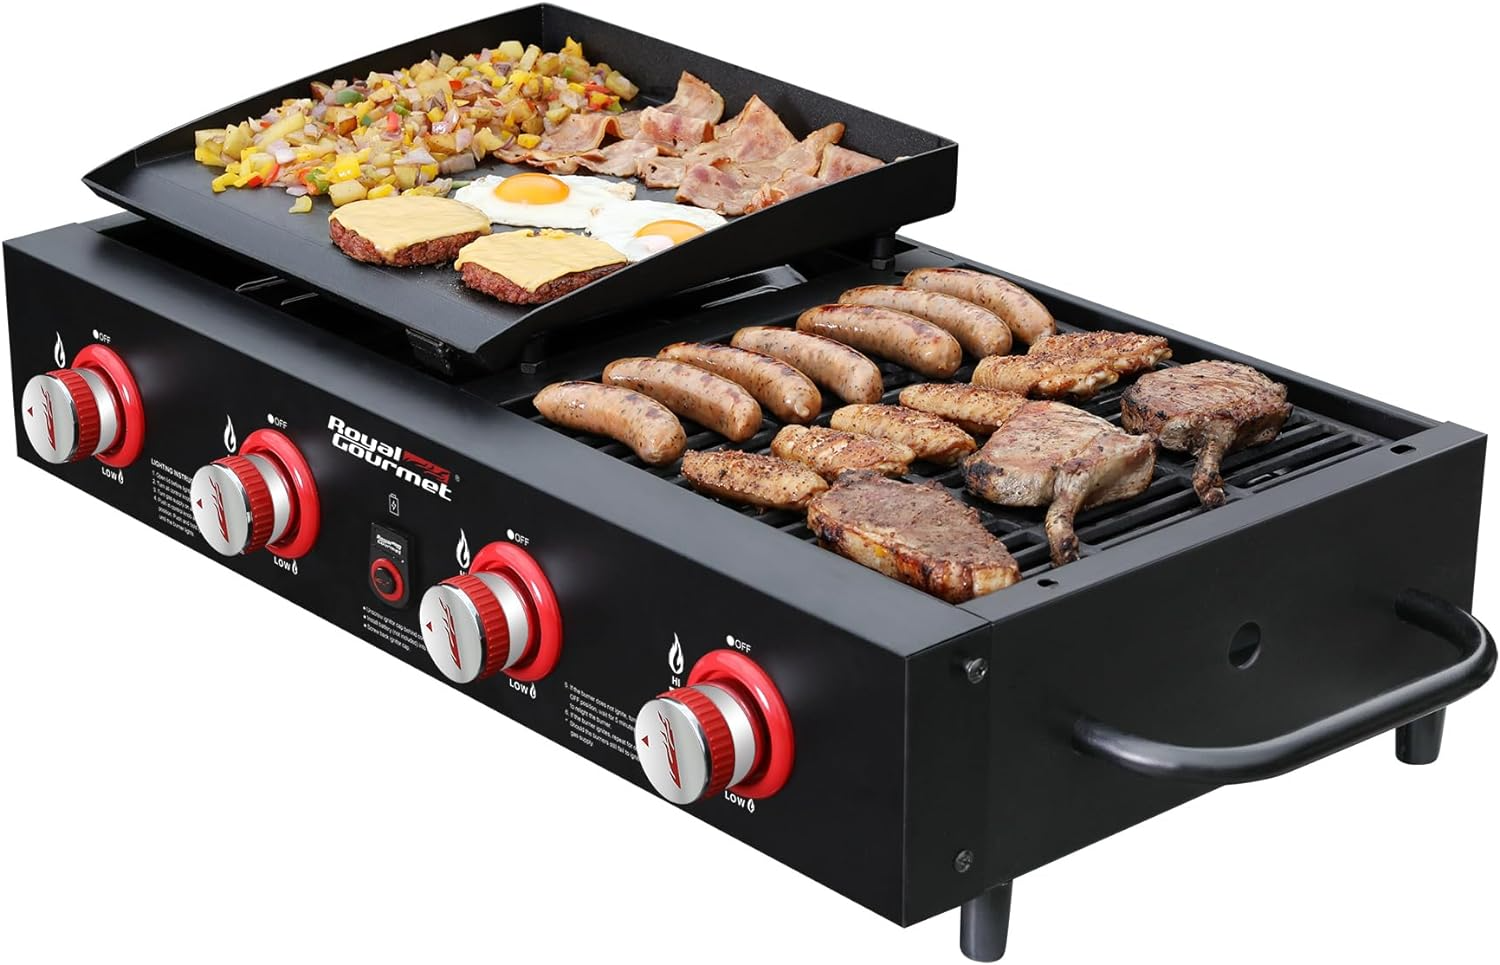 Royal Gourmet GD4002T Tailgater Tabletop Gas Grill Griddle, 4-Burner Portable Propane Grill Griddle Combo, for Backyard or Outdoor BBQ Cooking, 40,000 BTU, Black - Barbecue Whizz...Watch My Smoke!